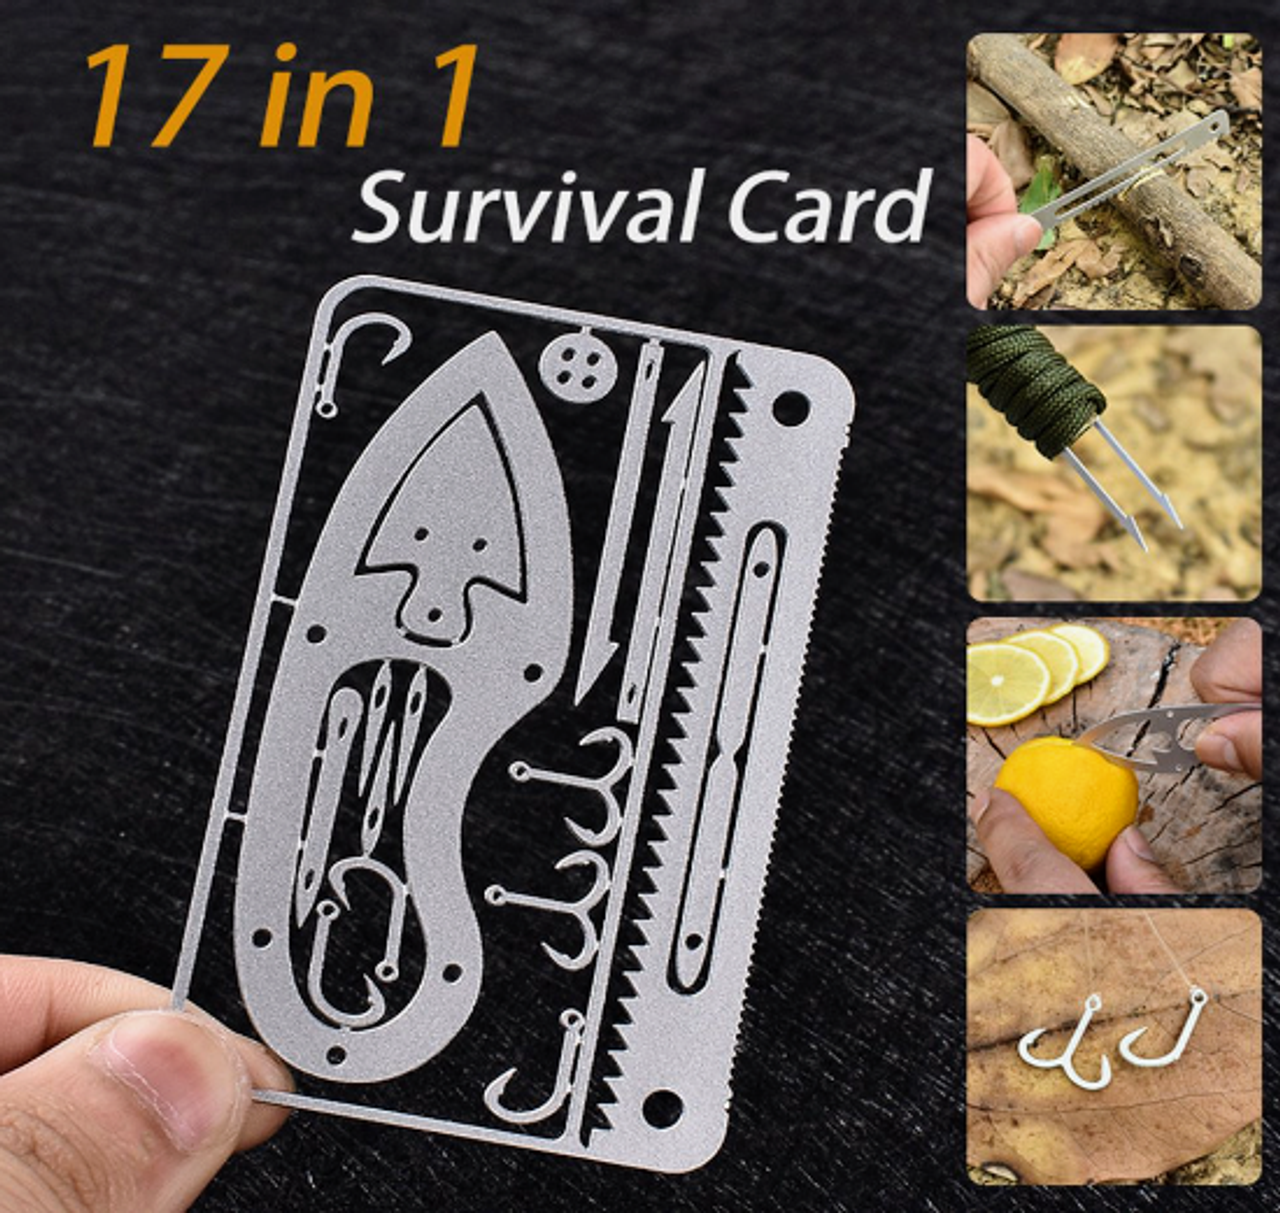 Buspoll Survival Card,18-in-1 EDC Wallet Multifunction Survival Tool kit  for Camping, Hiking,Fishing Card Survival